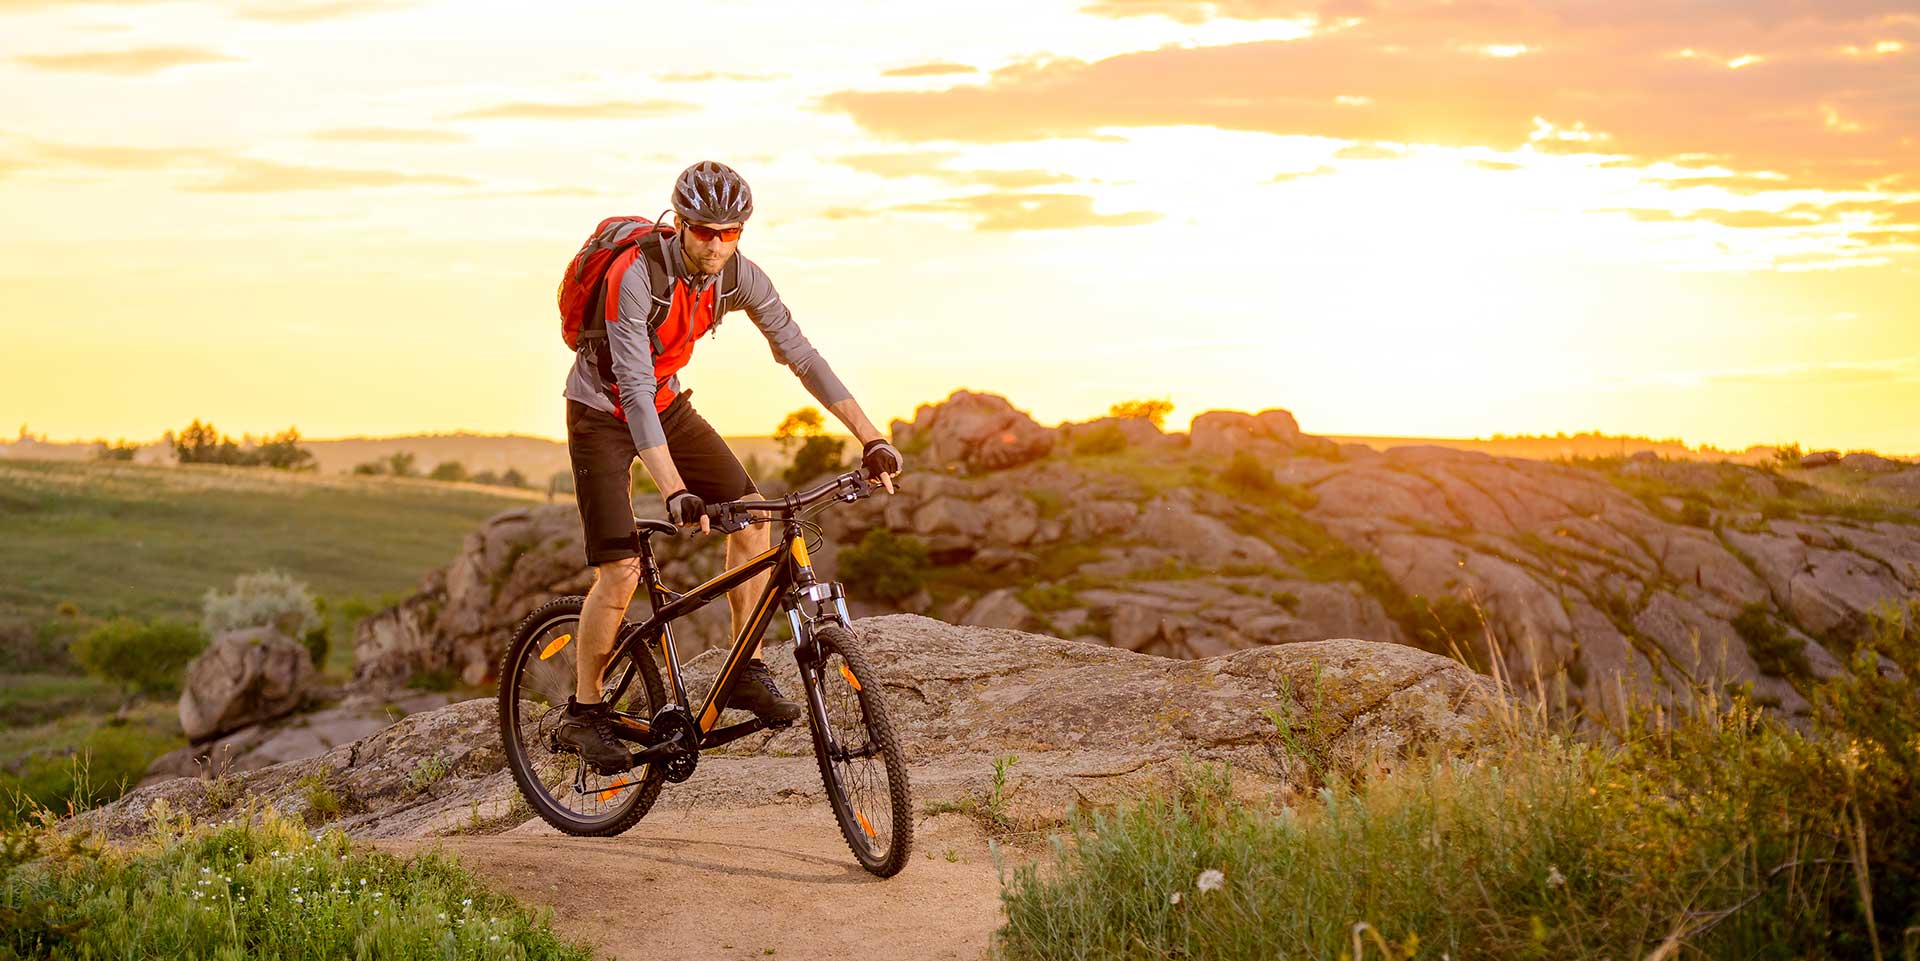 How To Plan and Prepare for a Mountain Biking Adventure